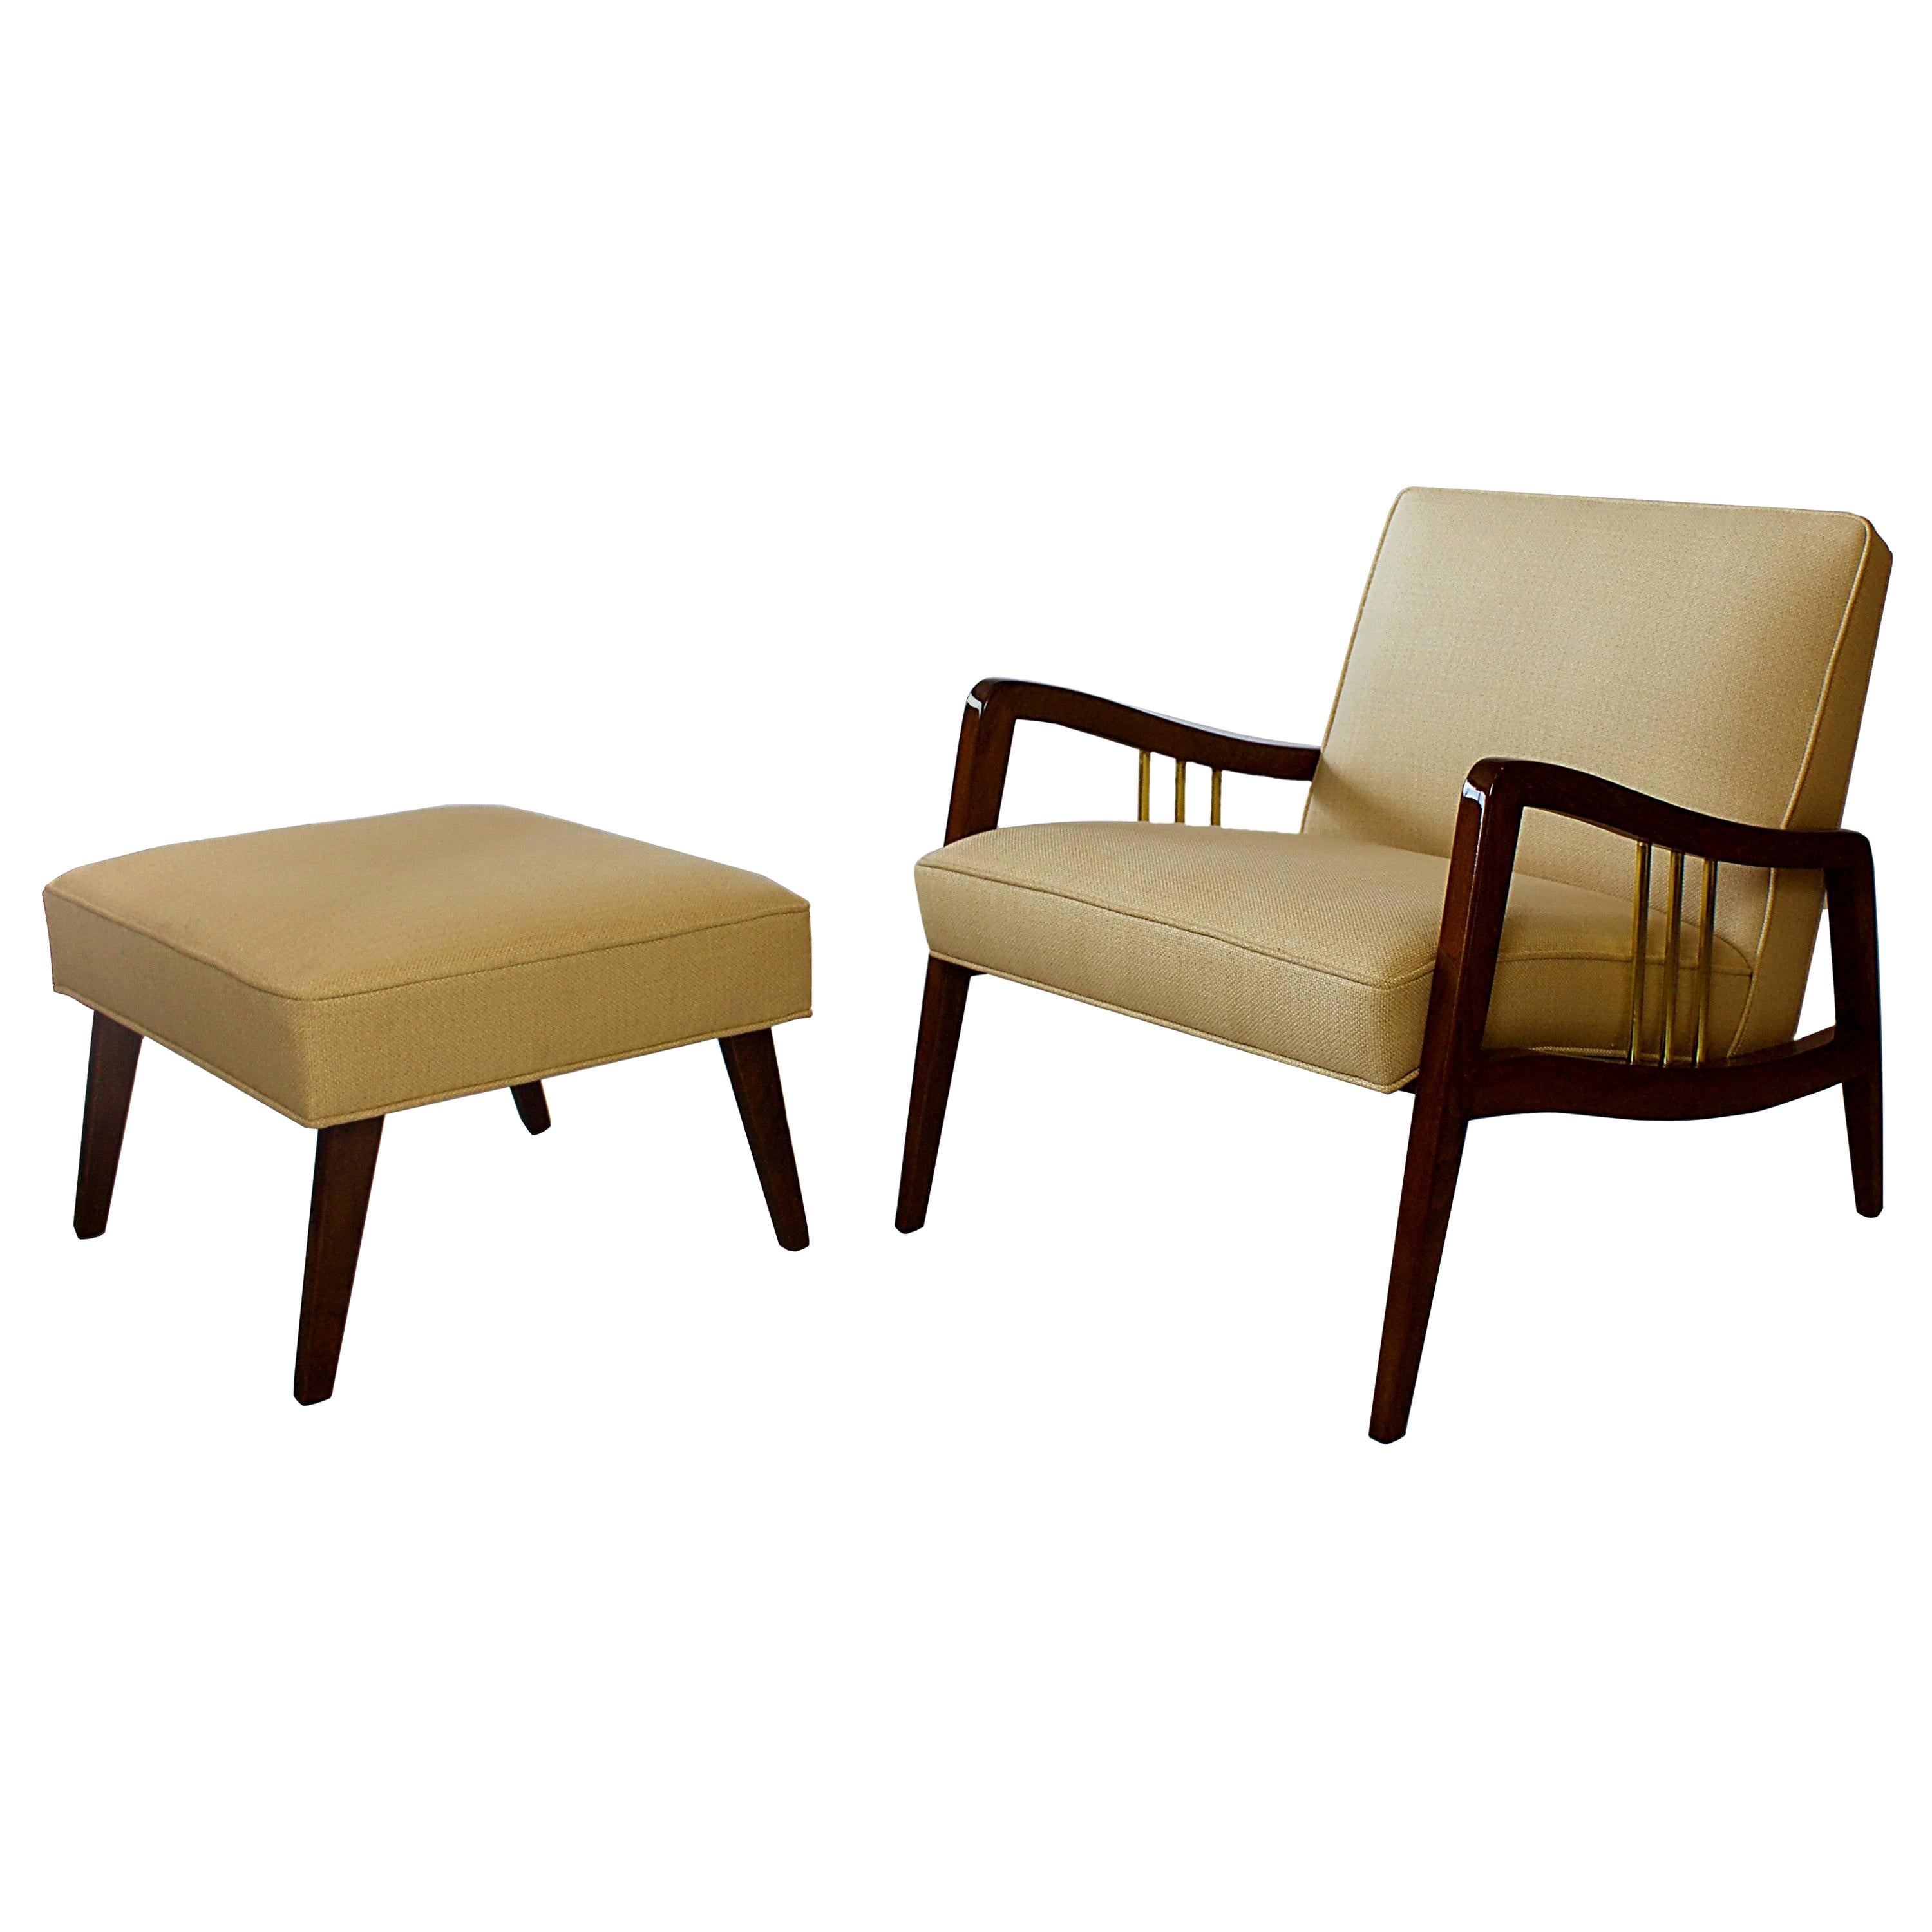 Italian Modern Mahogany and Brass Lounge Chair and Ottoman, Dassi